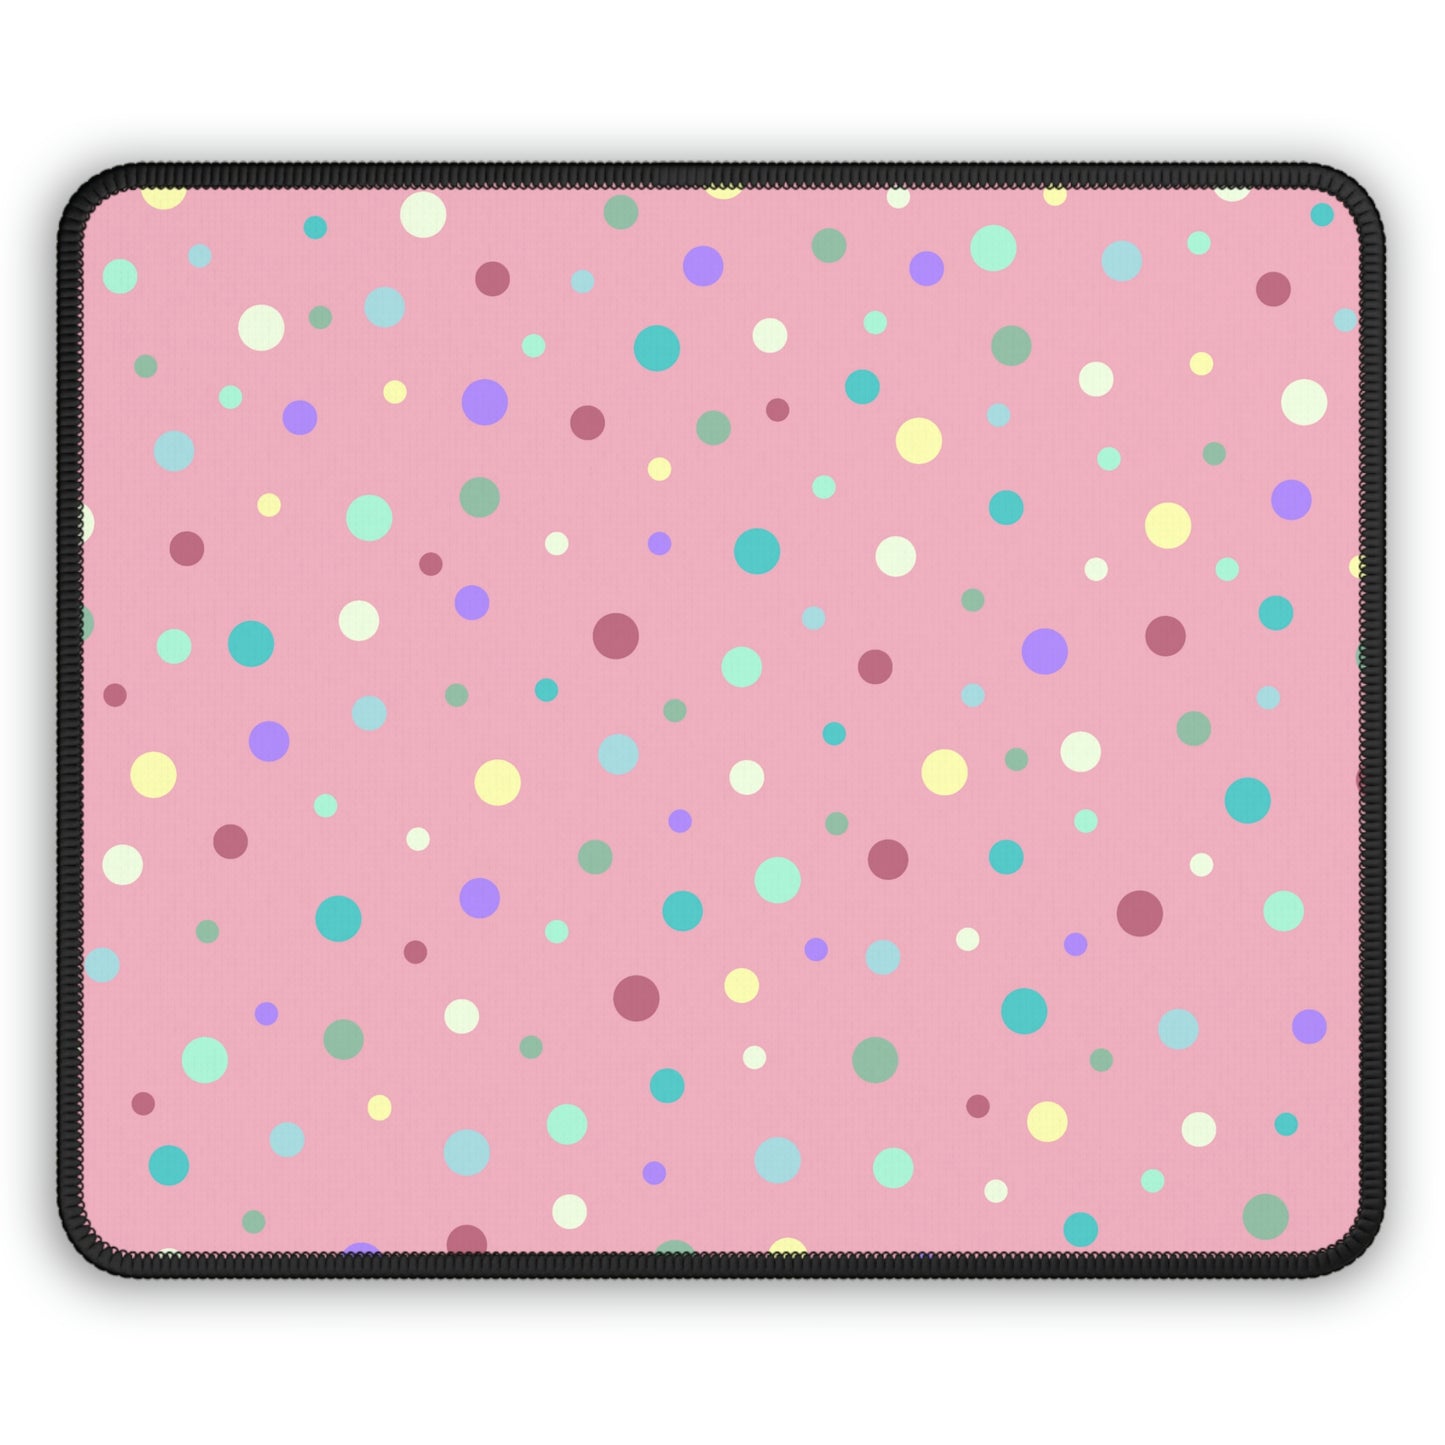 Colorful Dots Gaming Mouse Pad - Desk Cookies